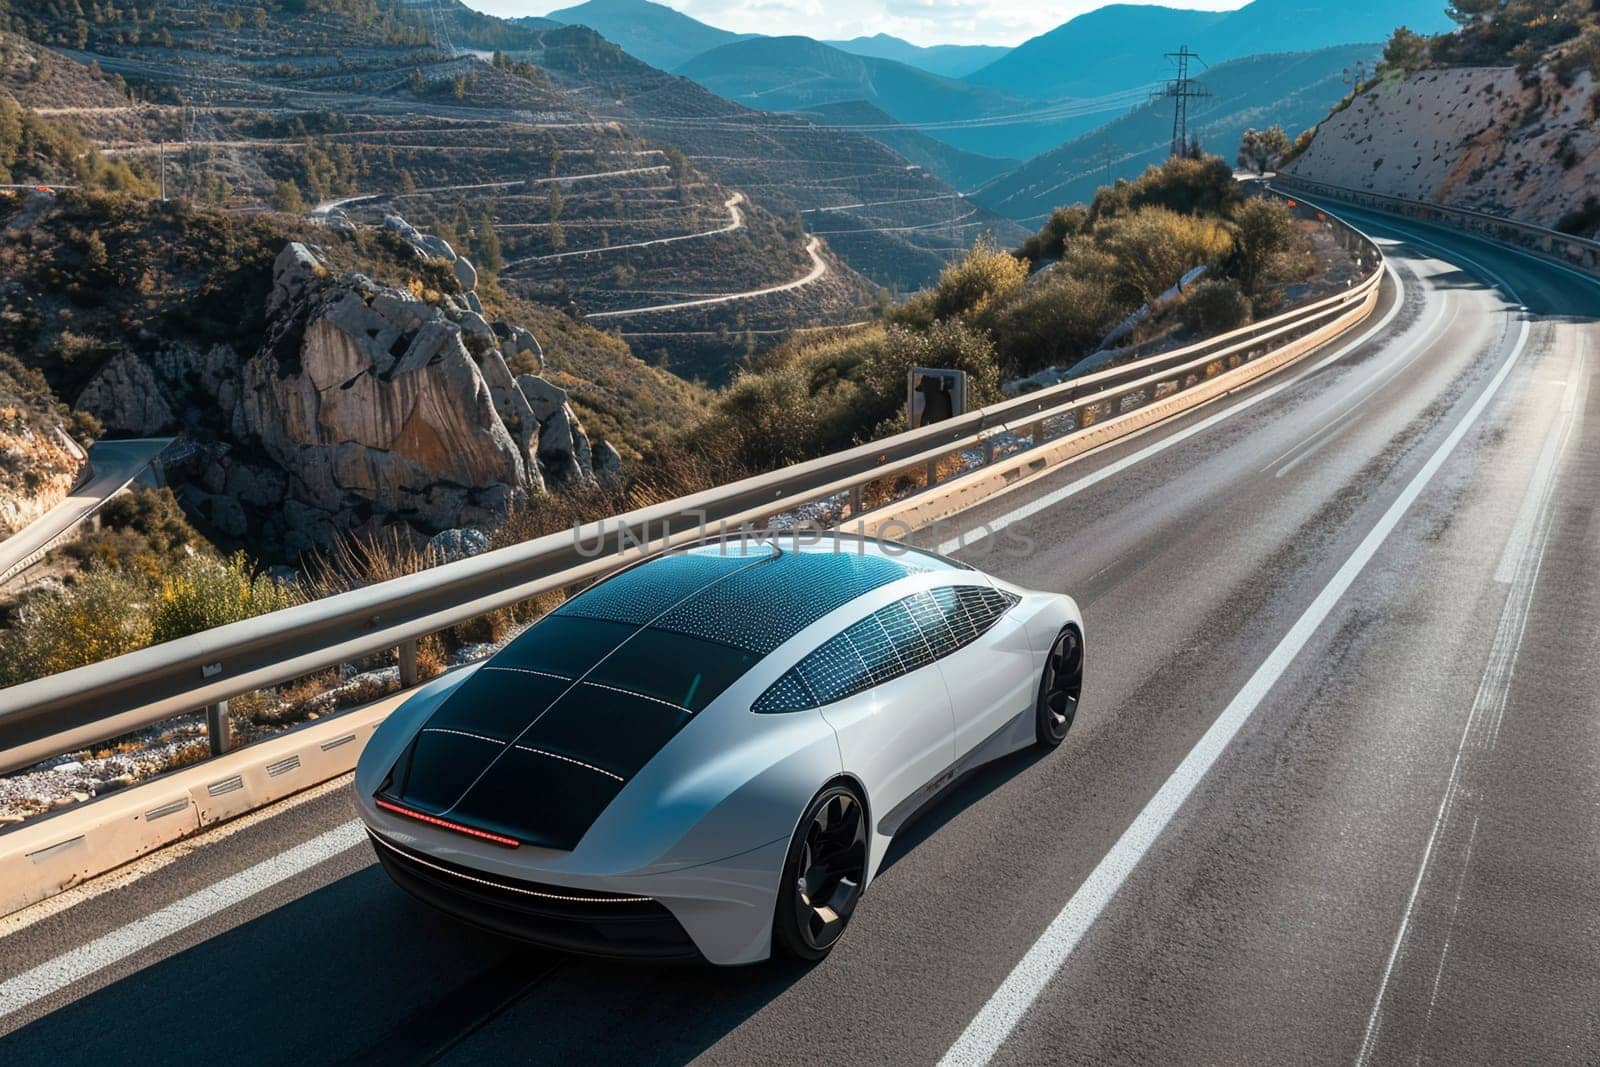 Eco-friendly transportation concept with solar-powered electric car cruising on scenic highway surrounded by mountains under clear sky.